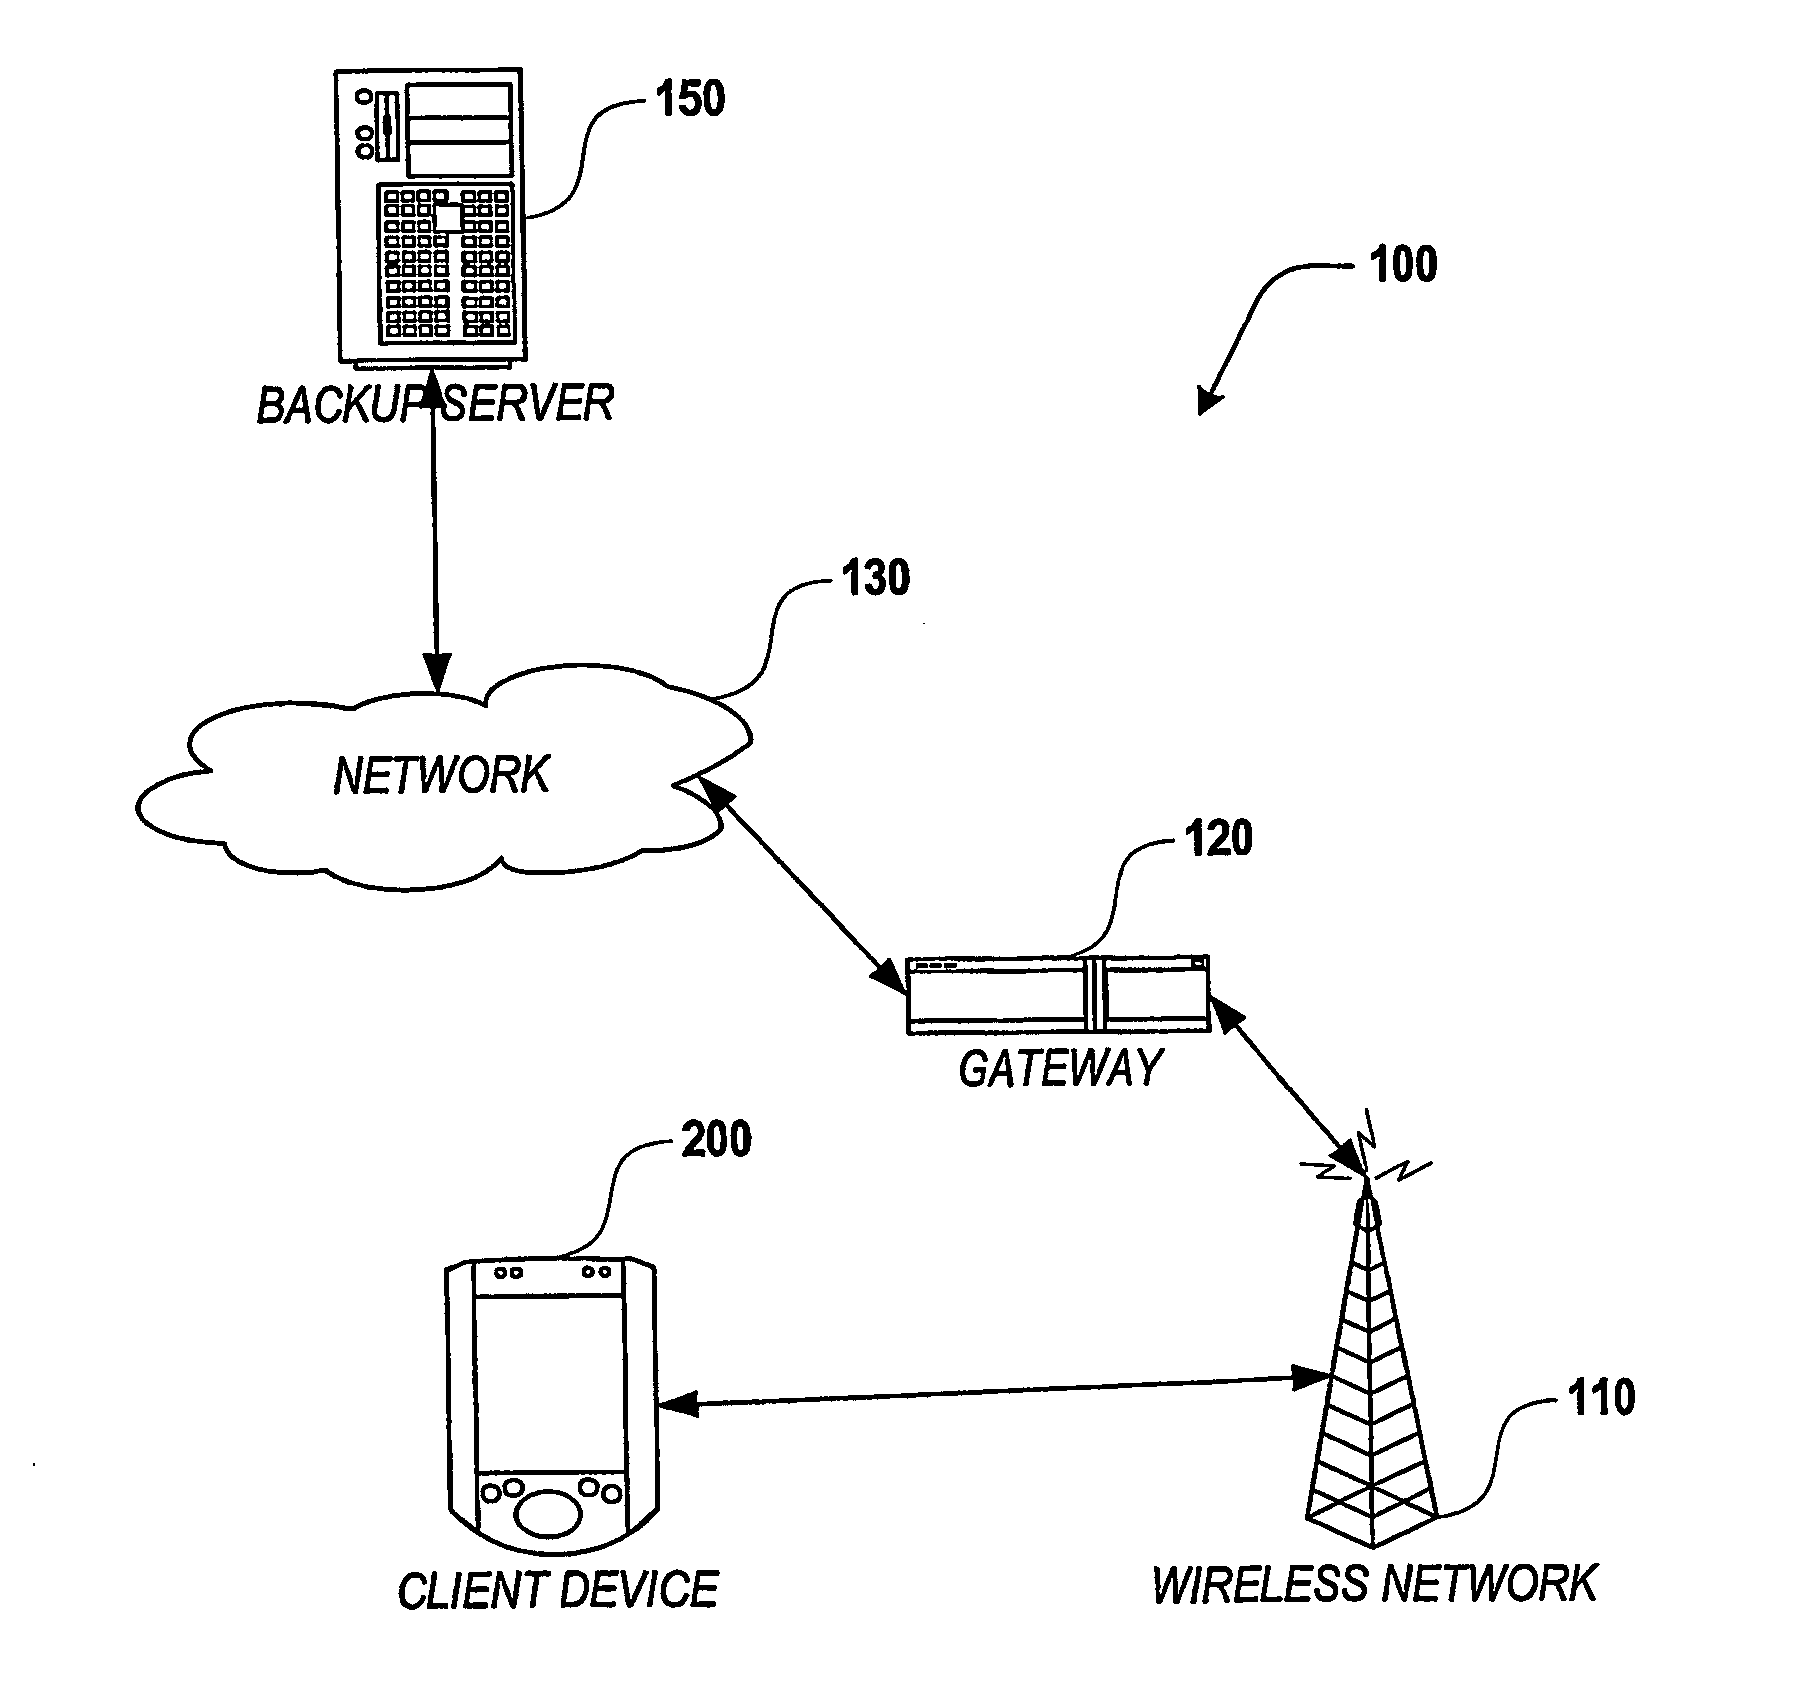 Backing up a wireless computing device